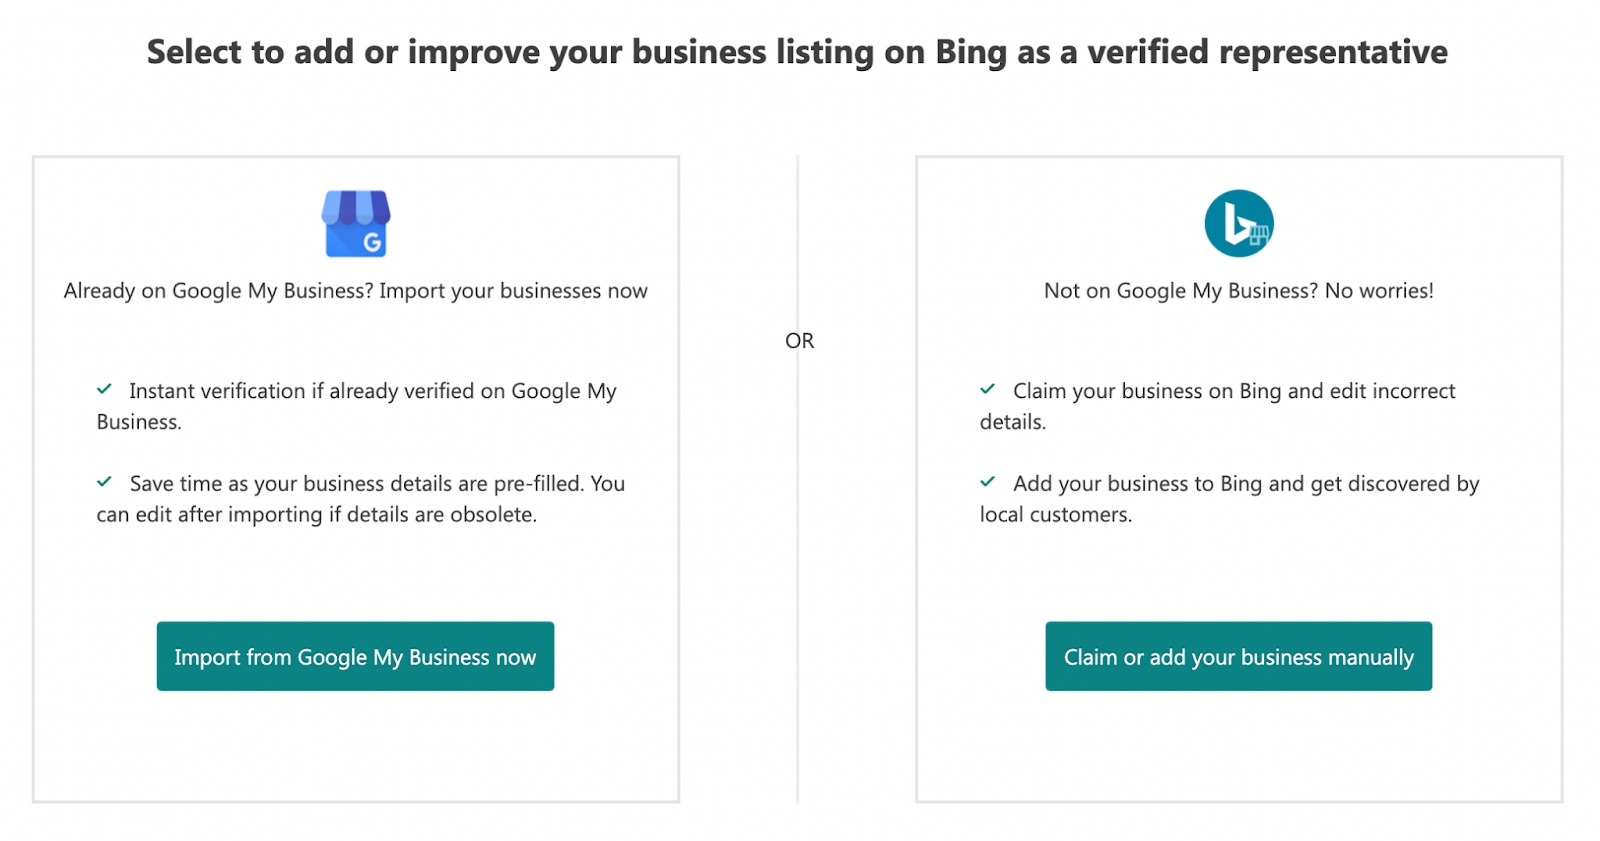 "Select to add or improve your business listing on Bing as a verified representative" window